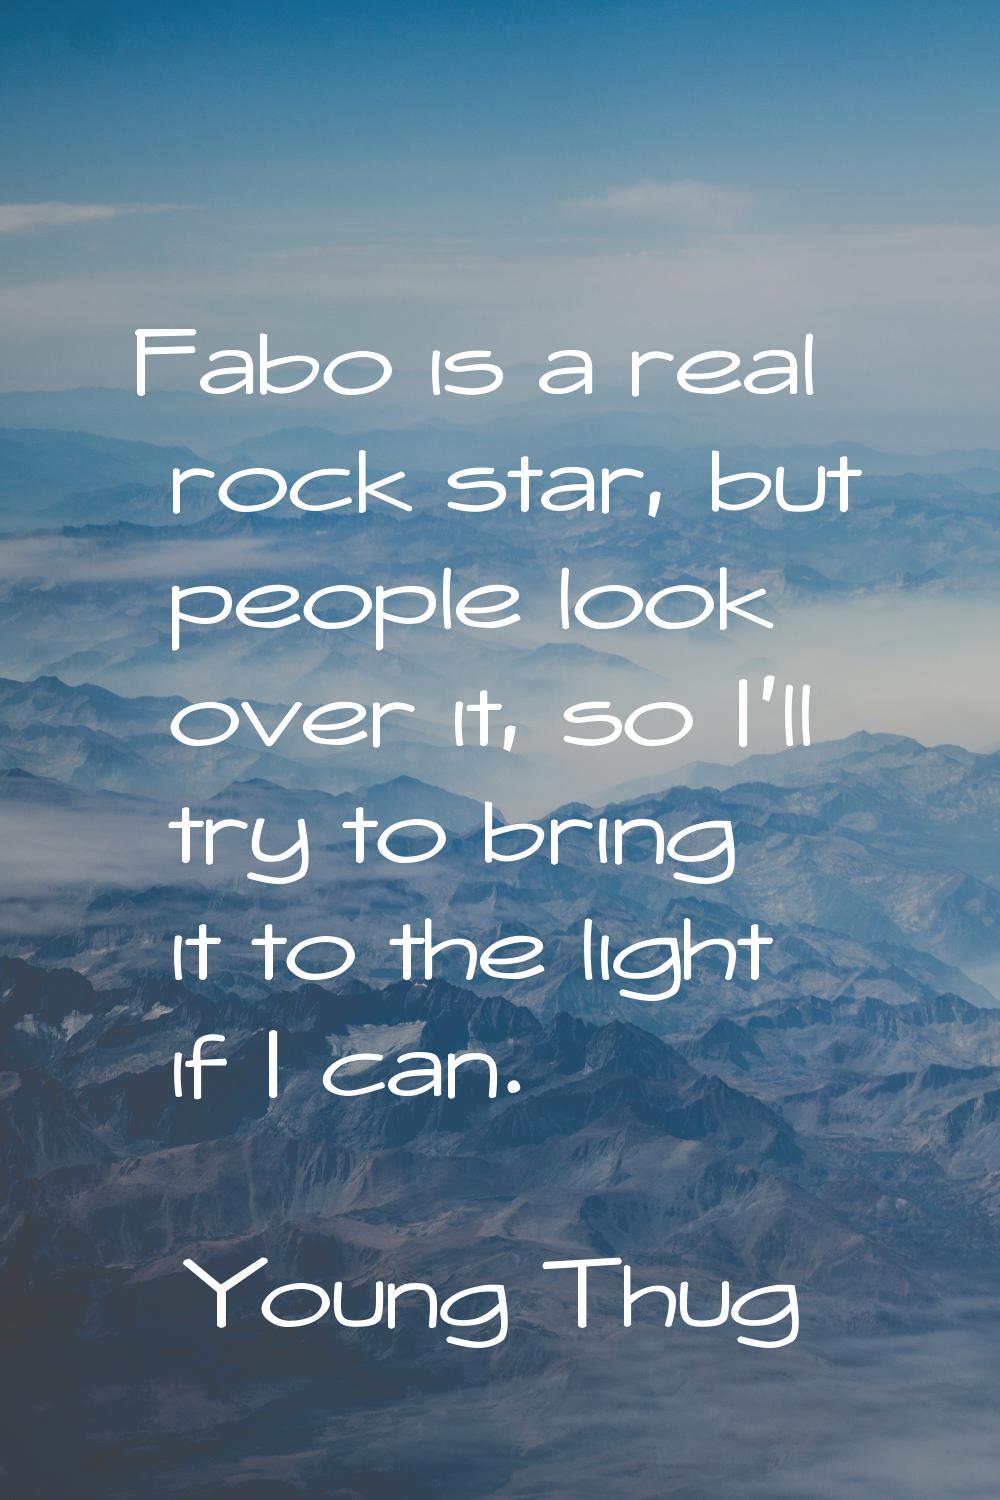 Fabo is a real rock star, but people look over it, so I'll try to bring it to the light if I can.